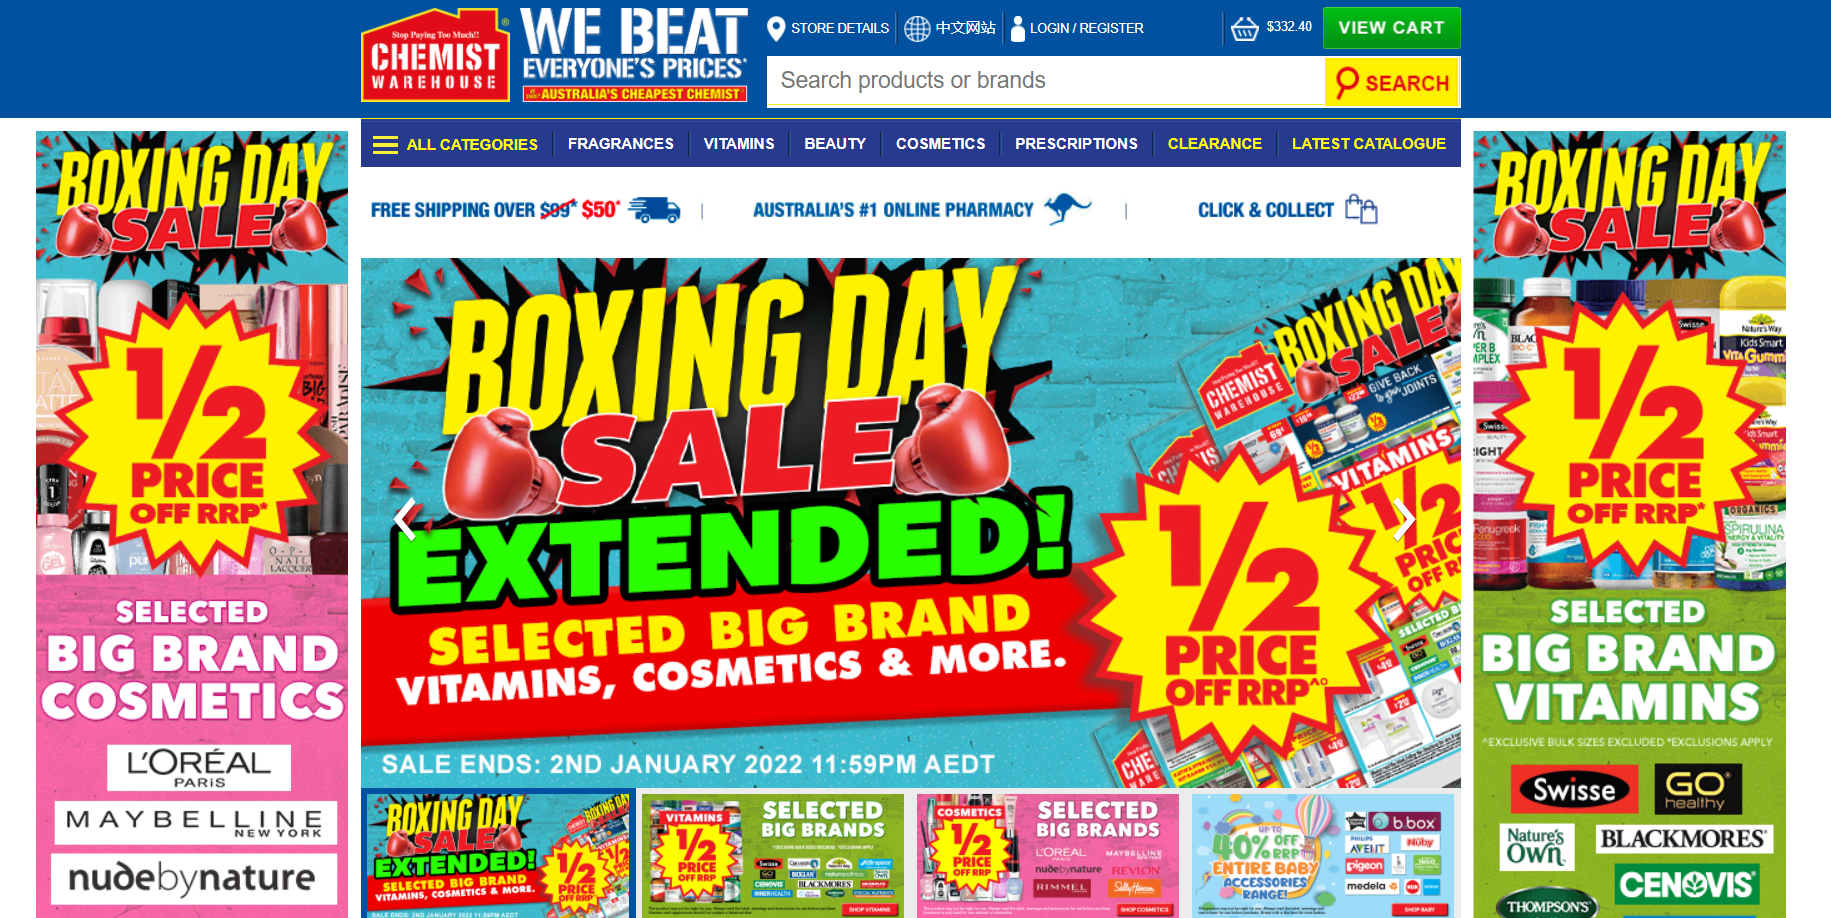 Chemist Warehouse Boxing Day Sale 50% OFF RRP on selected Big brand vitamins, cosmetics & more